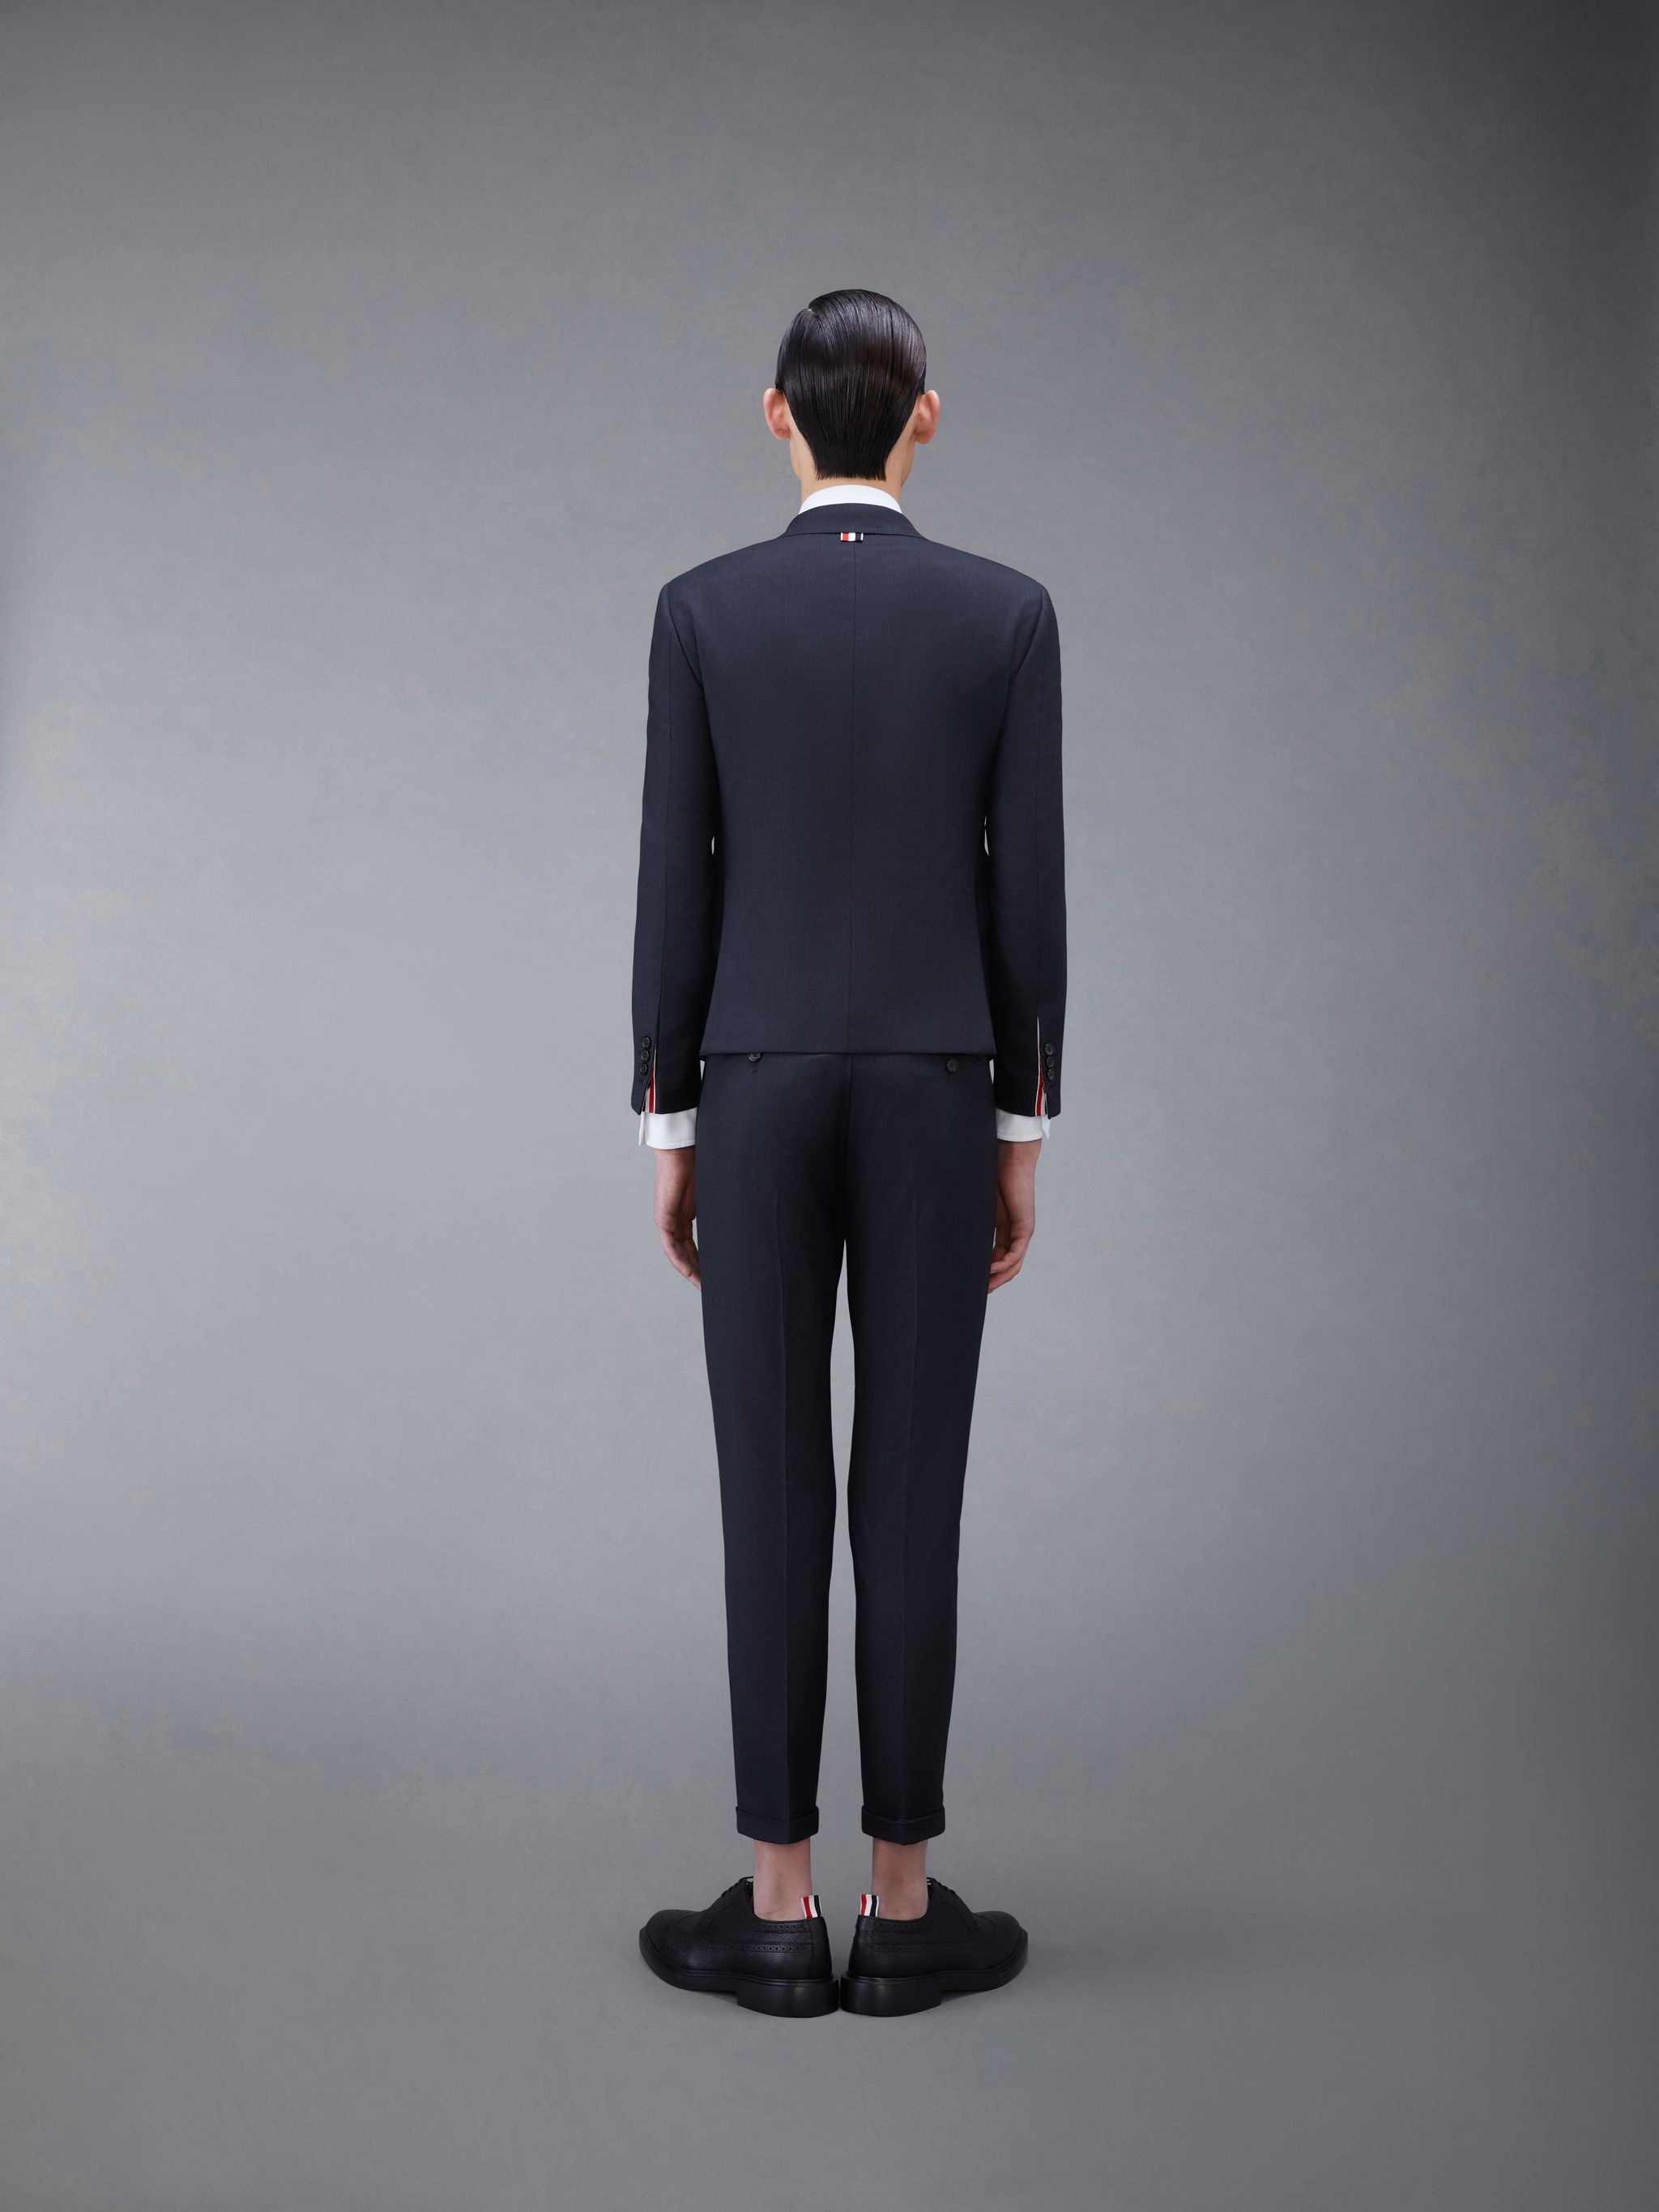 CHARCOAL GREY SUPER 120S TWILL HIGH ARMHOLE SUIT WITH TIE AND LOW RISE SKINNY TROUSER - 2